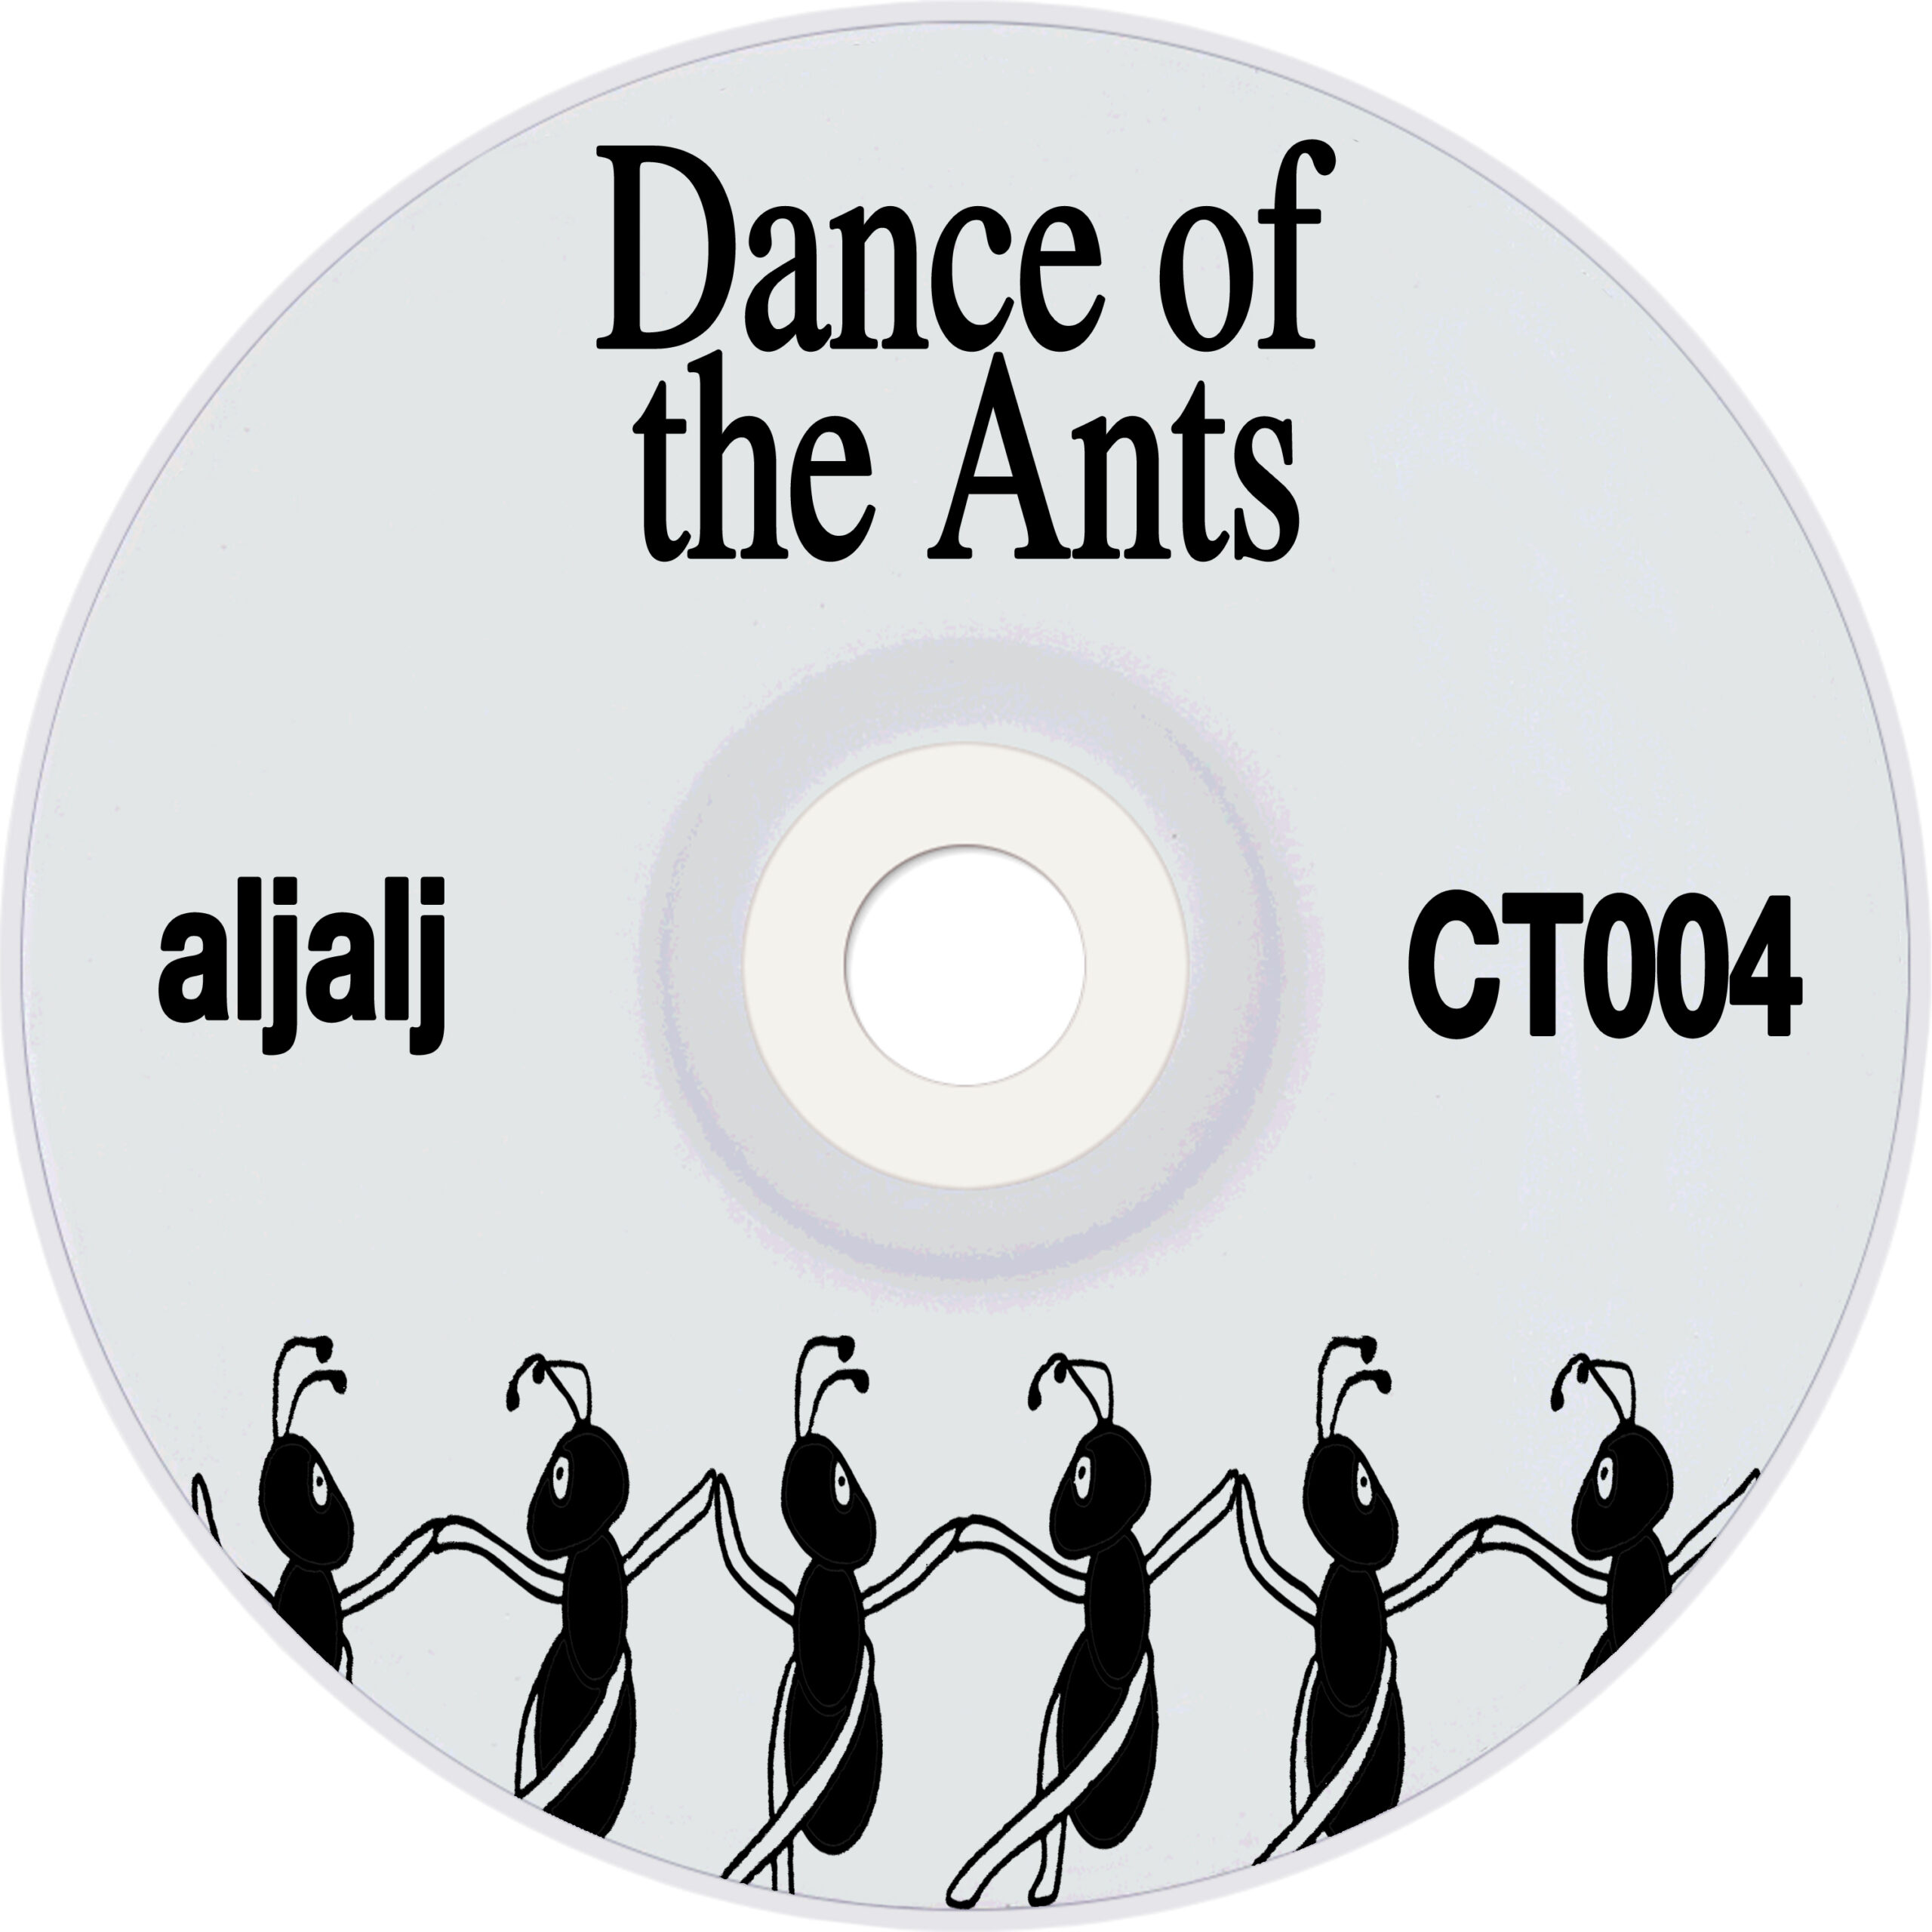 Cover Artwork of the track Dance of the Ants by aljalj. Dancing ants in a row.